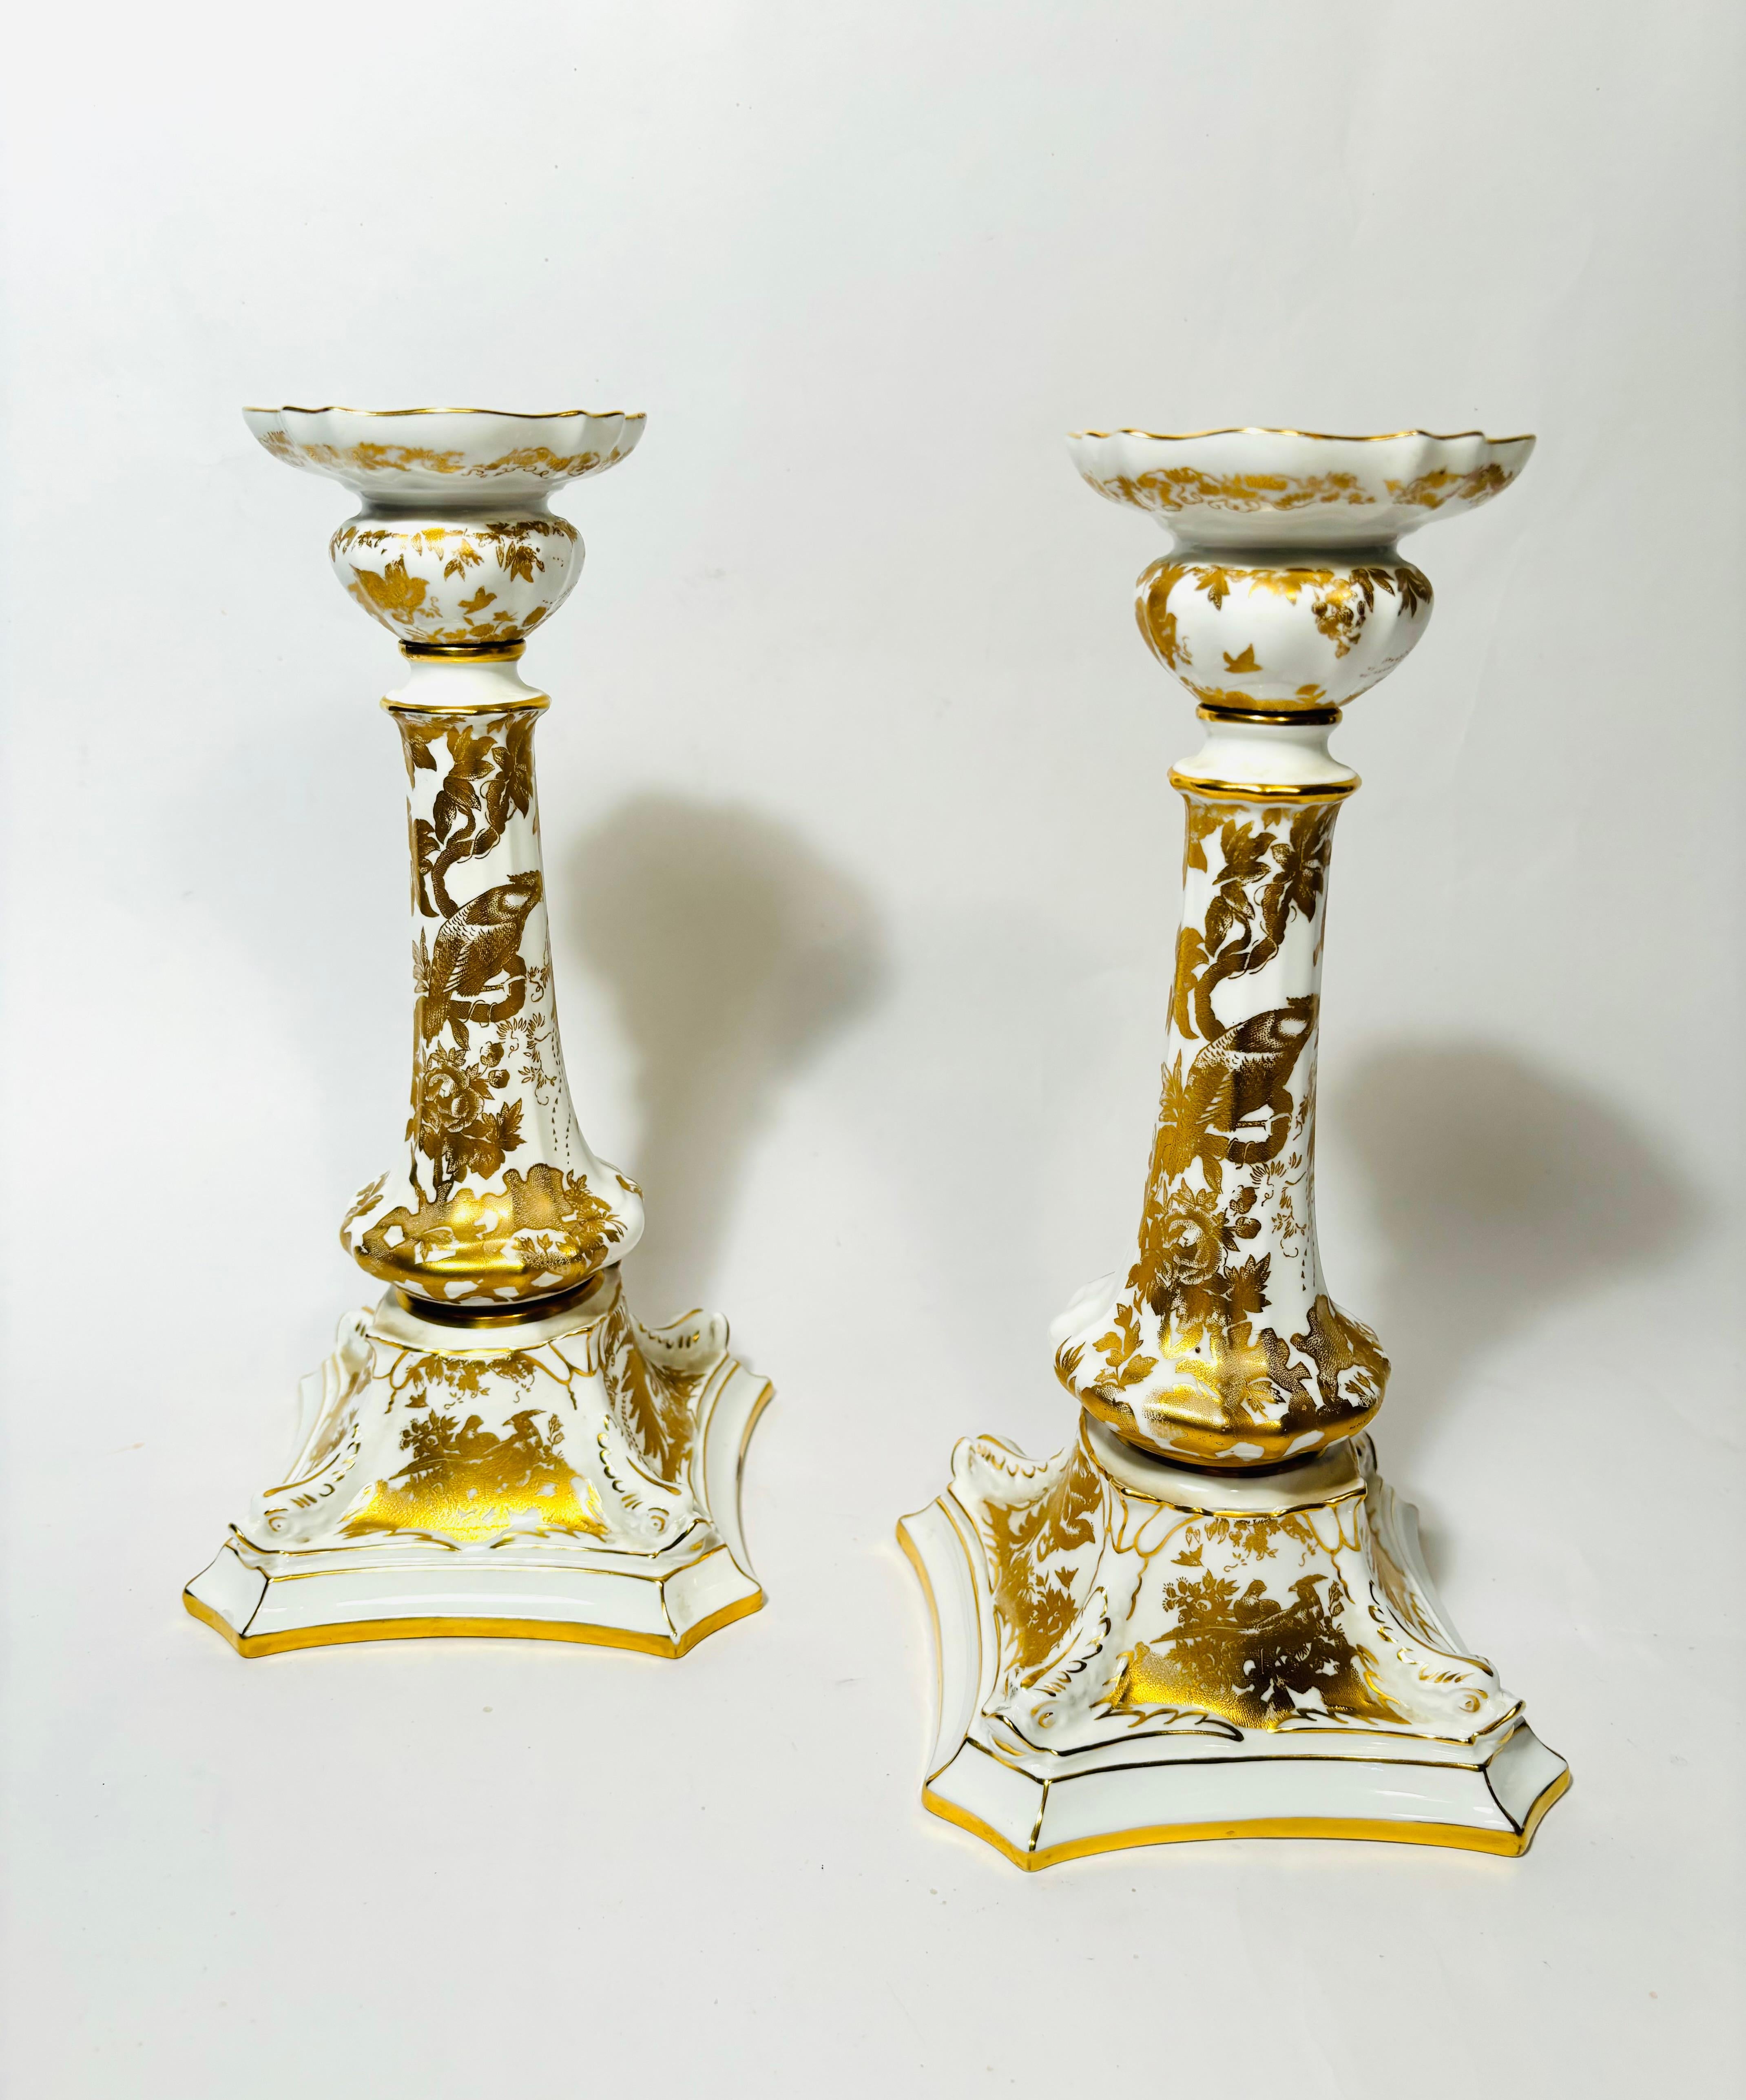 An elegant pair of 24 karat gold and white fine porcelain candlesticks by the re known English firm of Royal Crown Derby. This elaborate design of adorned birds and peacocks is applied throughout the pieces. The Aves pattern was adapted from an